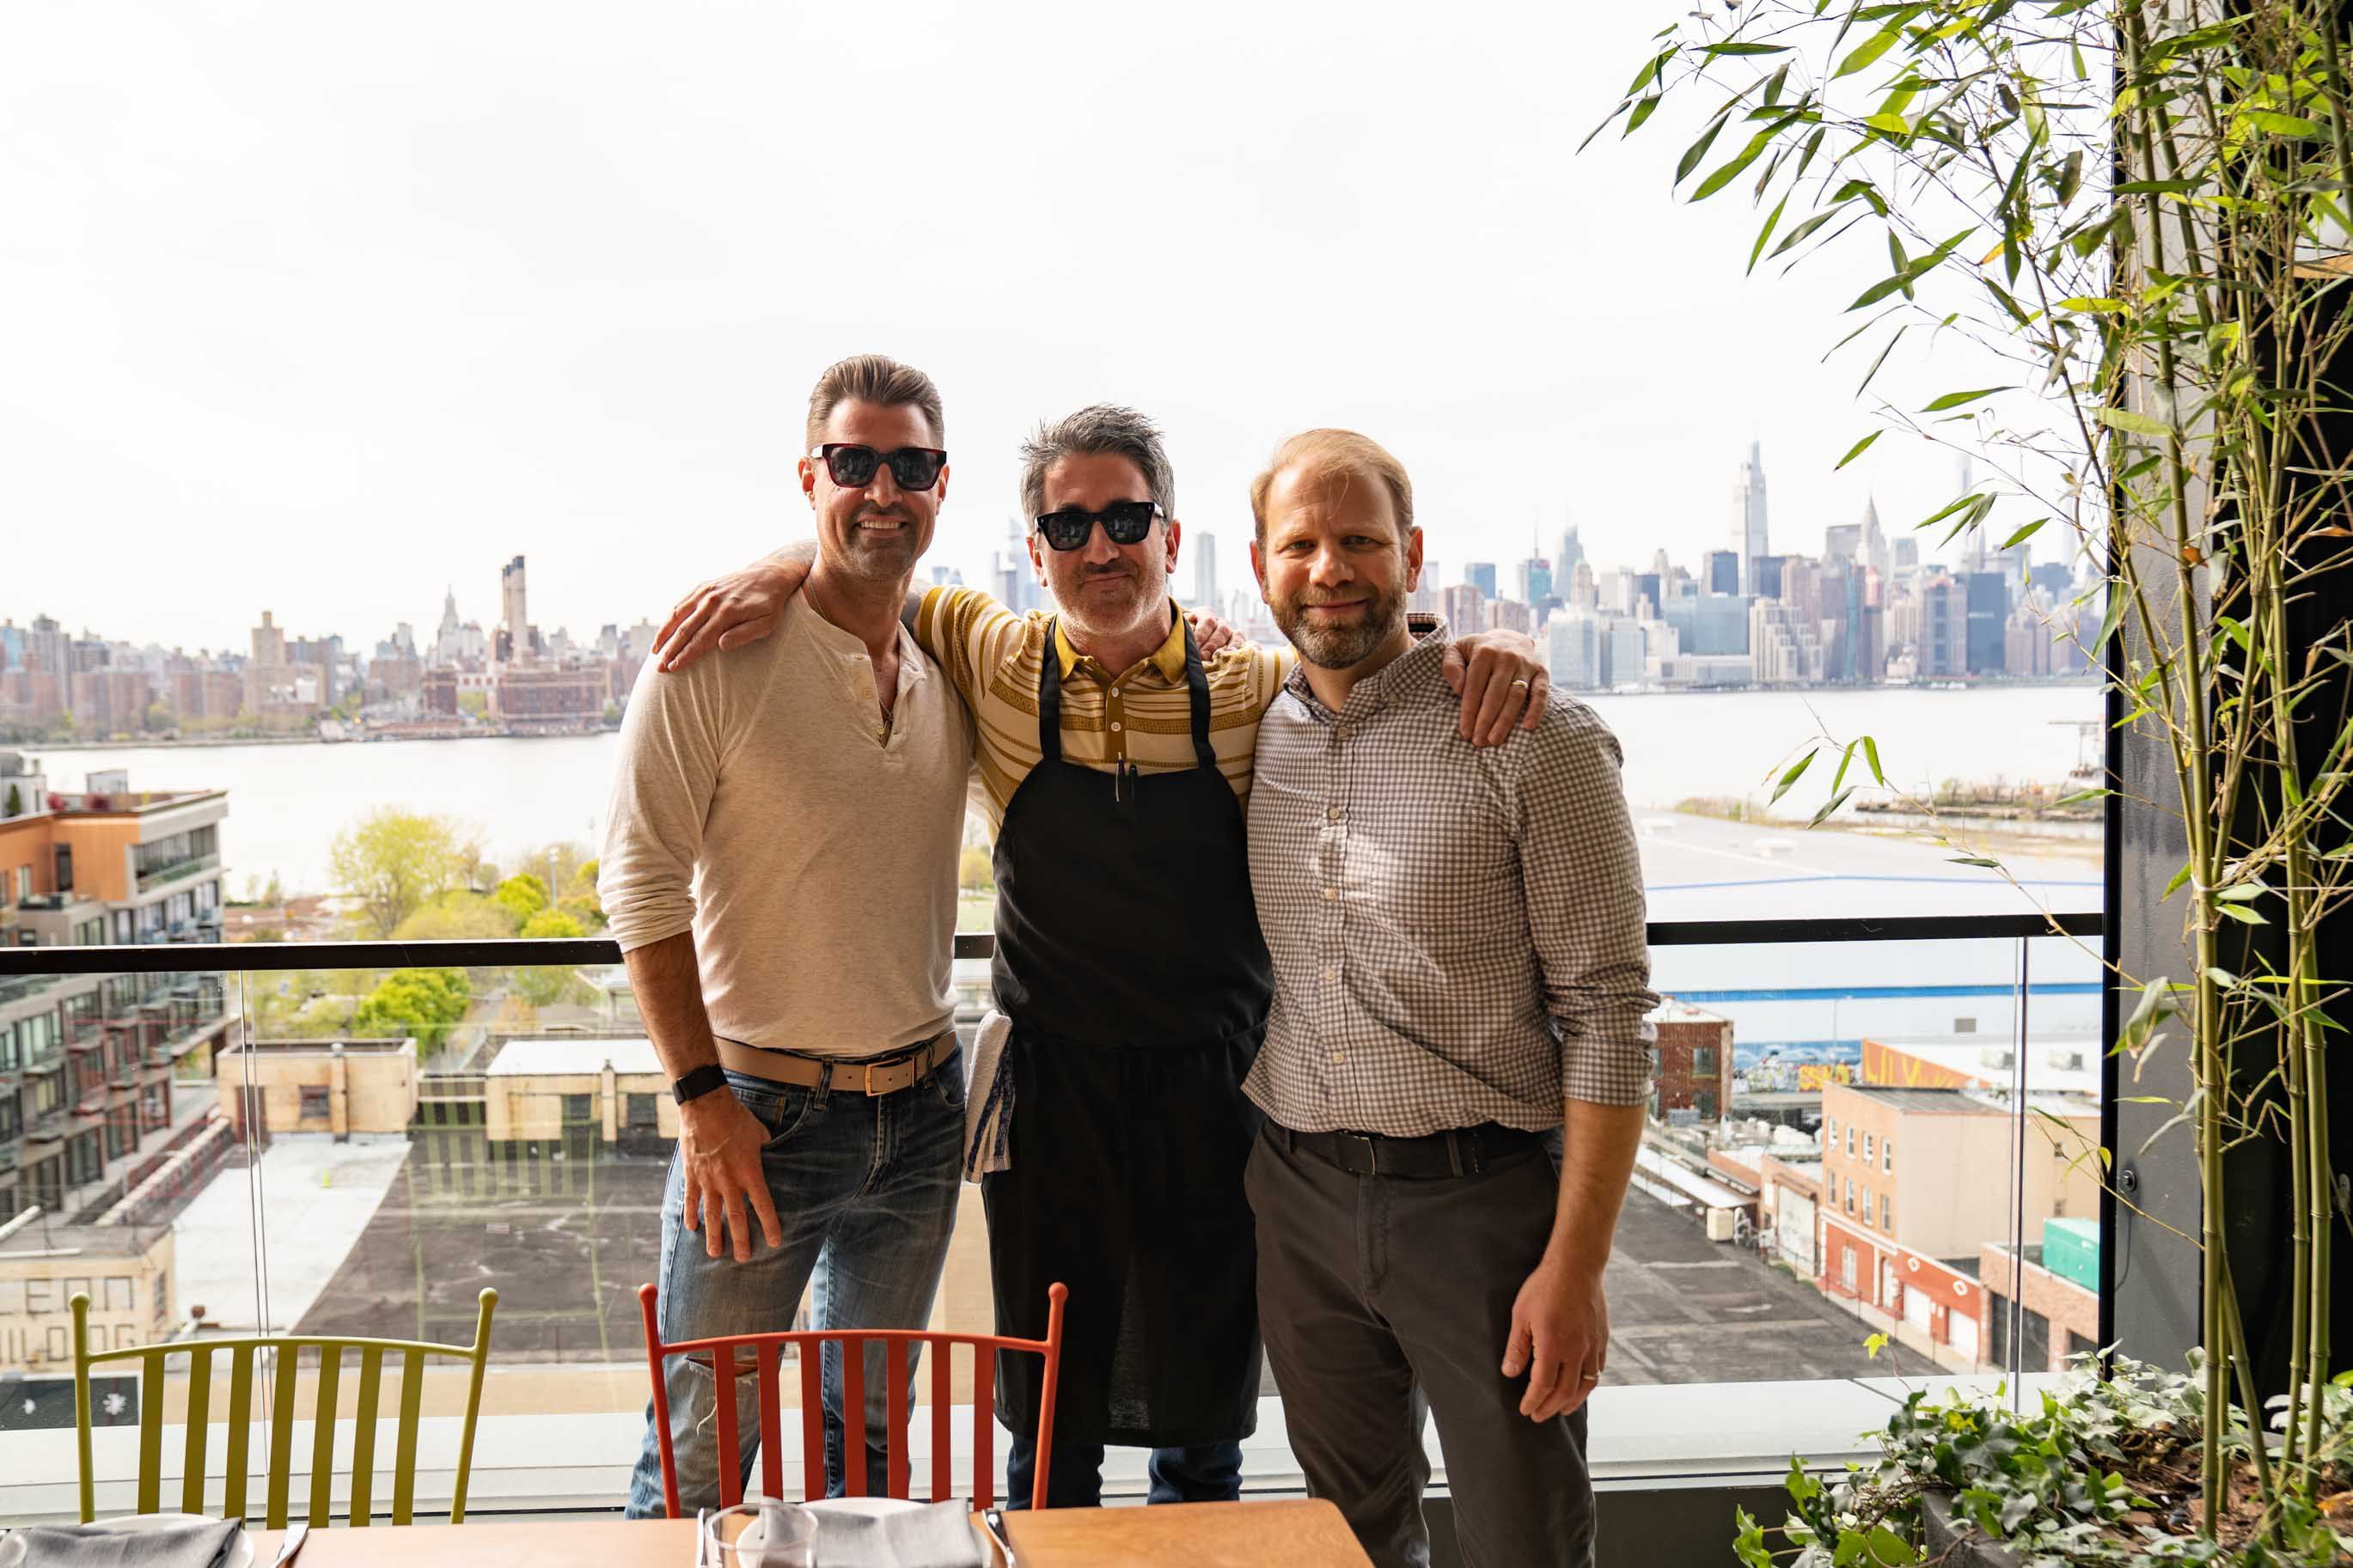 The New York-Philly restaurant connection forges ahead, carrying